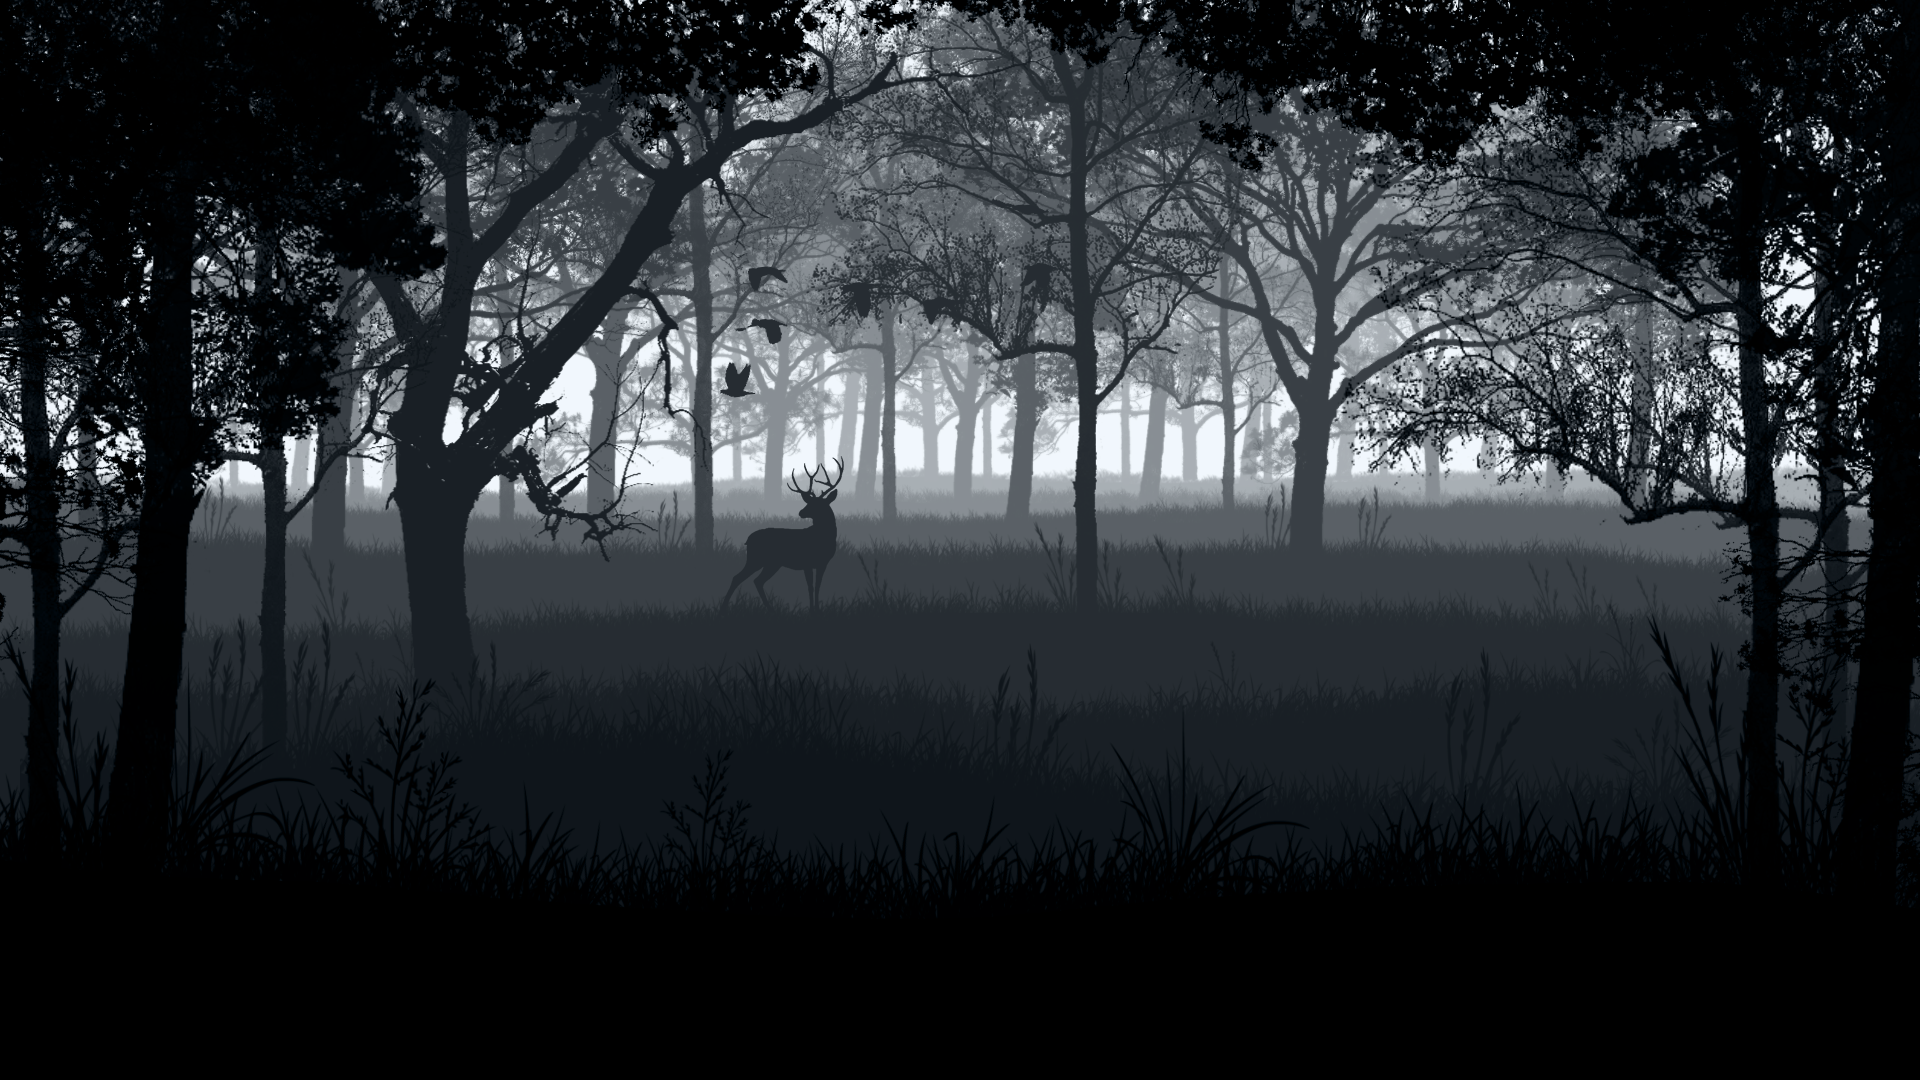 A deer in the forest [1920x1080]